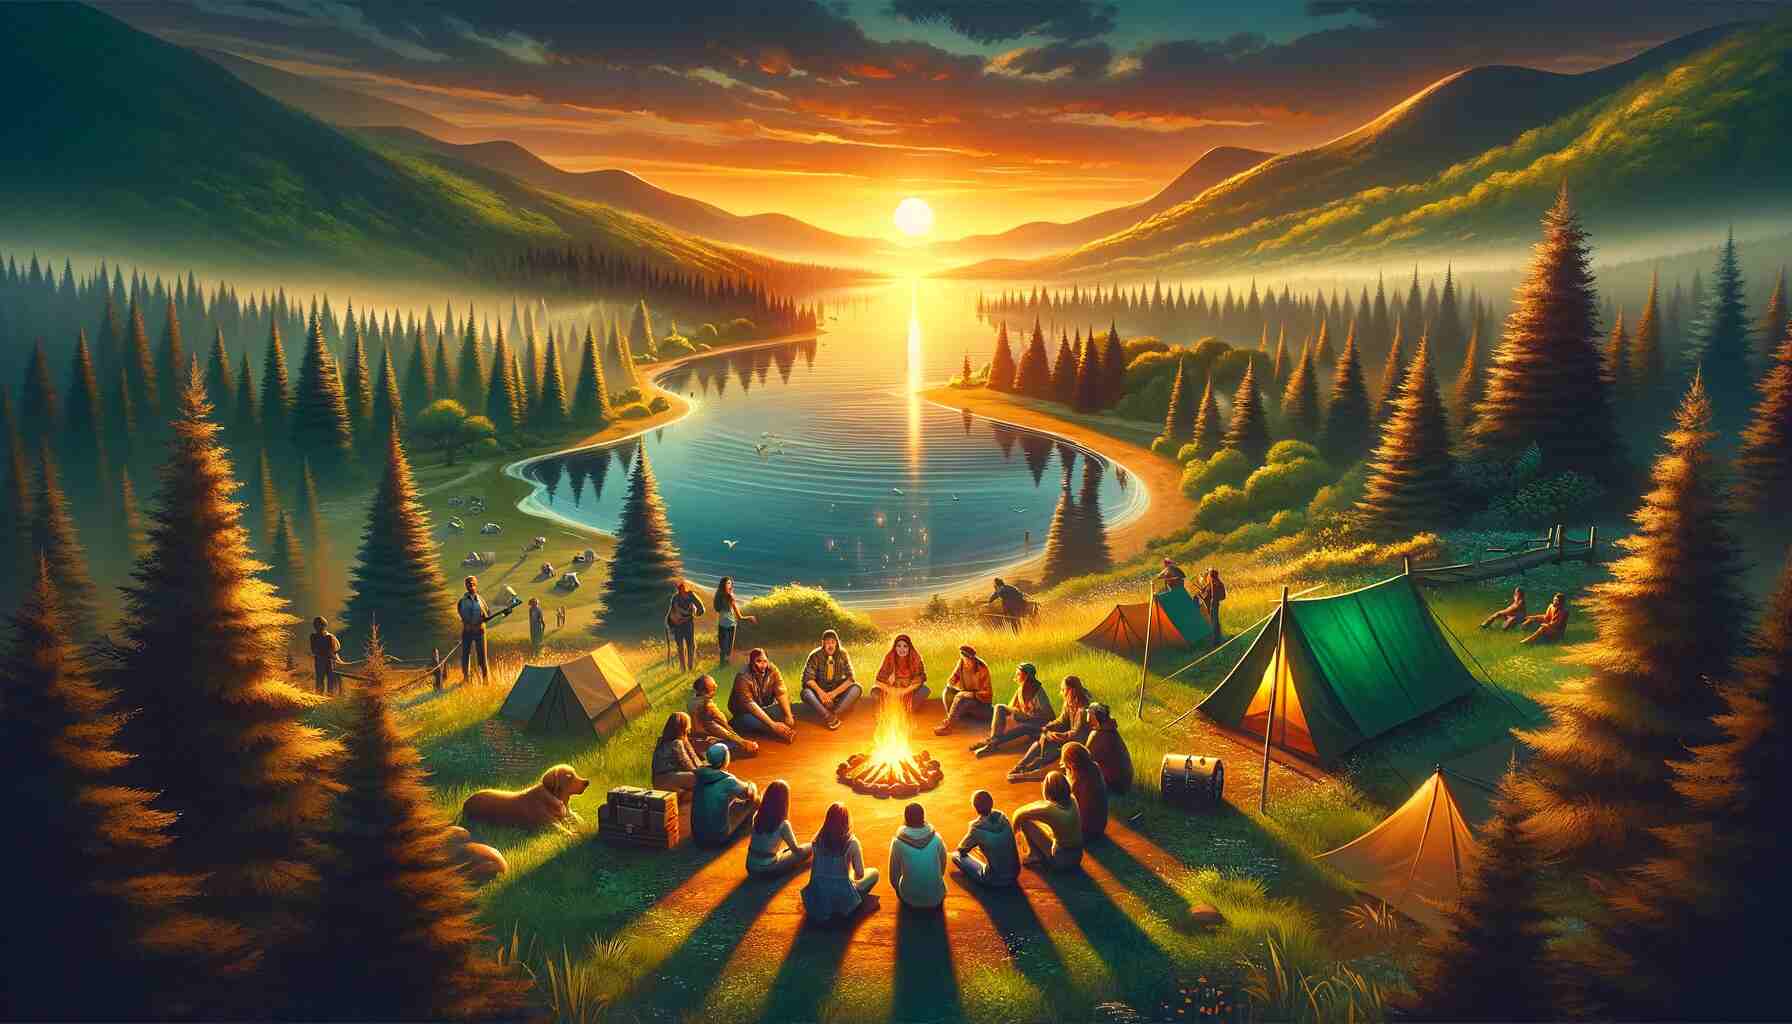 This image features a tranquil, natural landscape illuminated by the warm hues of a summer sunset. In the foreground, a diverse group of people are gathered around a campfire, engaged in conversations, laughter, and enjoying each other's company. Nearby, several tents are pitched, indicating a camping setting. The background reveals a picturesque lake with gentle ripples, encircled by lush green forests and undulating hills. Notably, the absence of any modern technology in the scene emphasizes the theme of disconnecting from digital devices to reconnect with nature and each other.